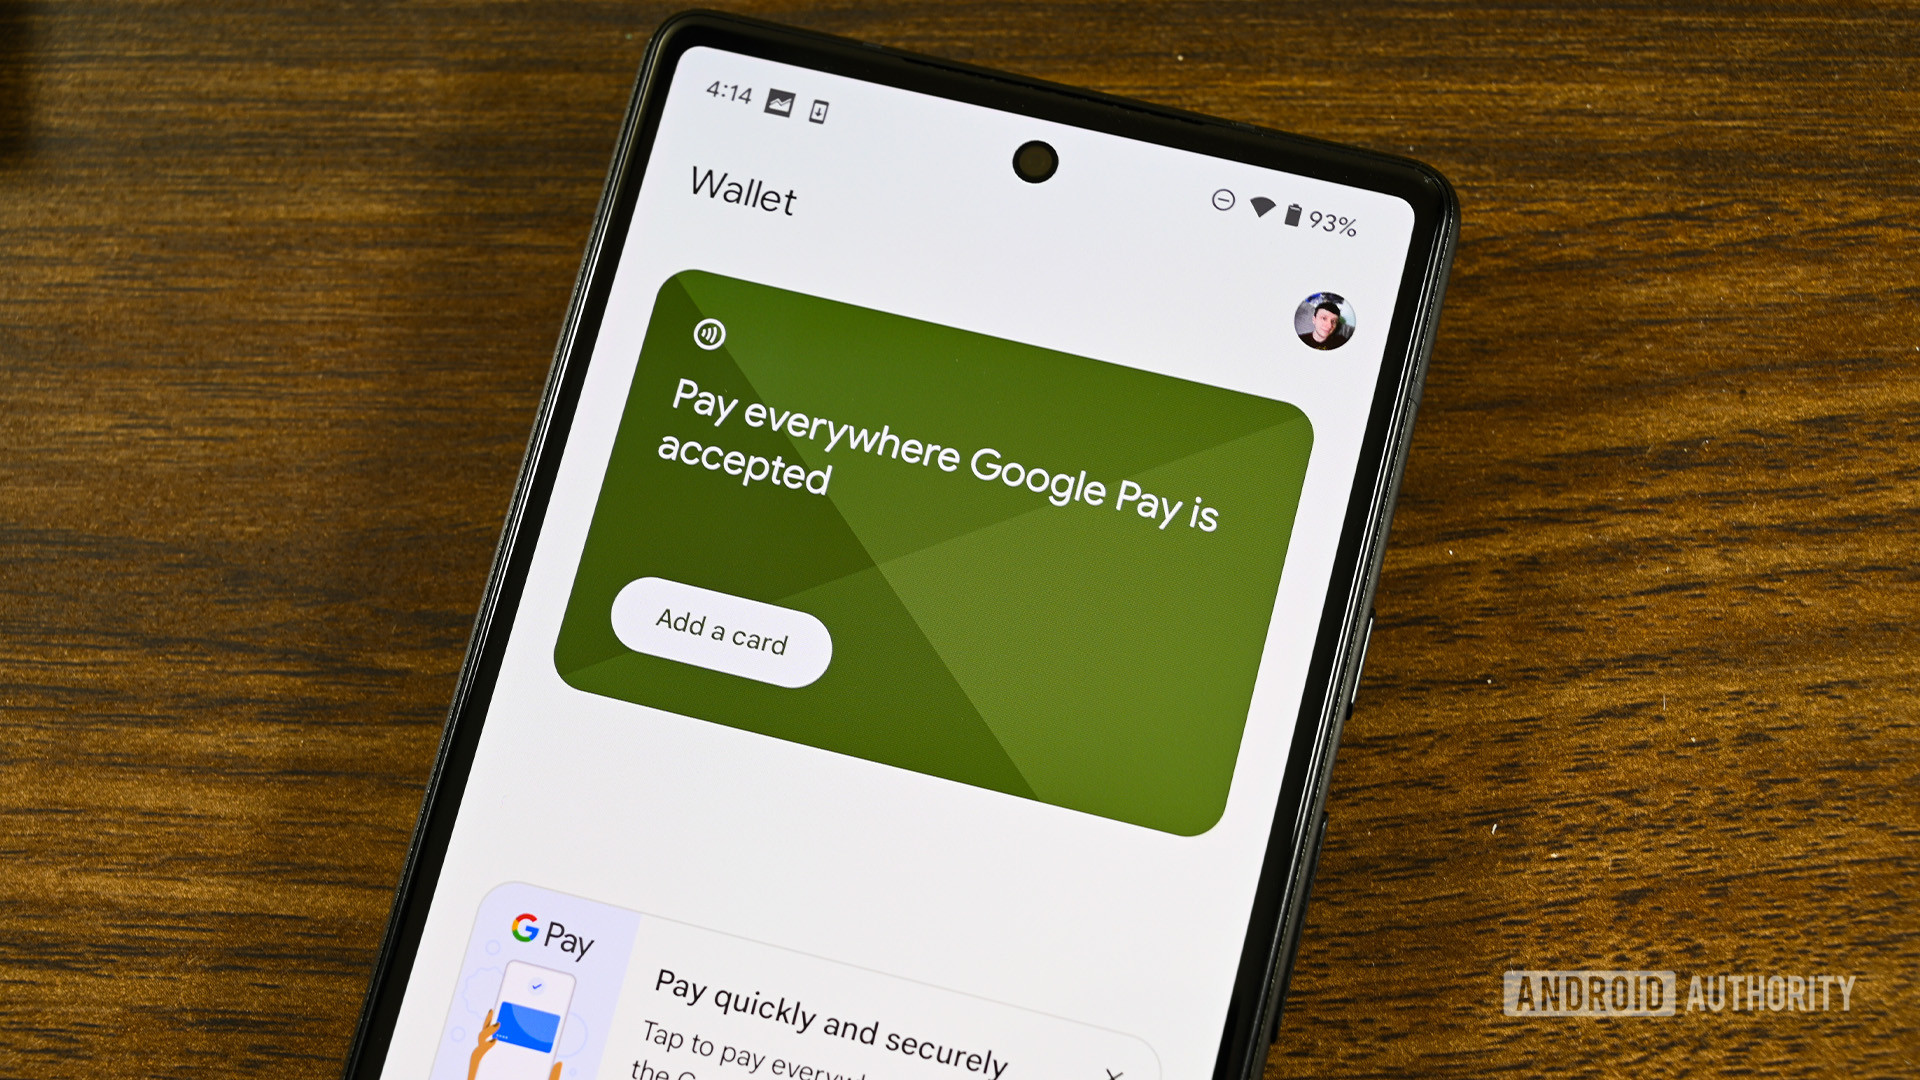 Google Wallet will now let you add your gym card and any other pass with a photo